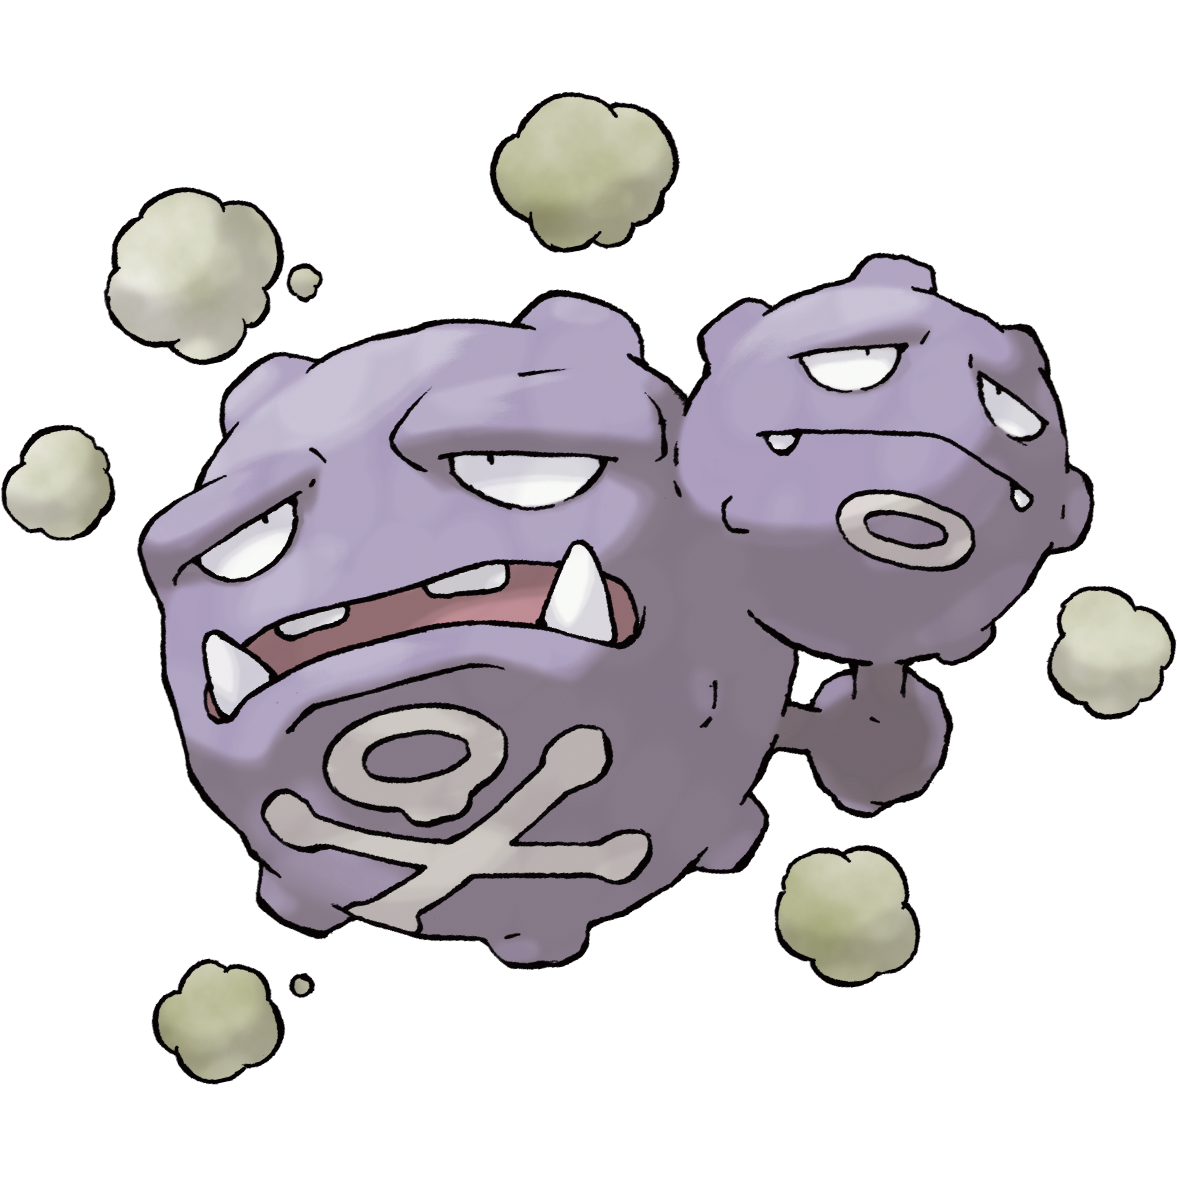 What is Weezing?